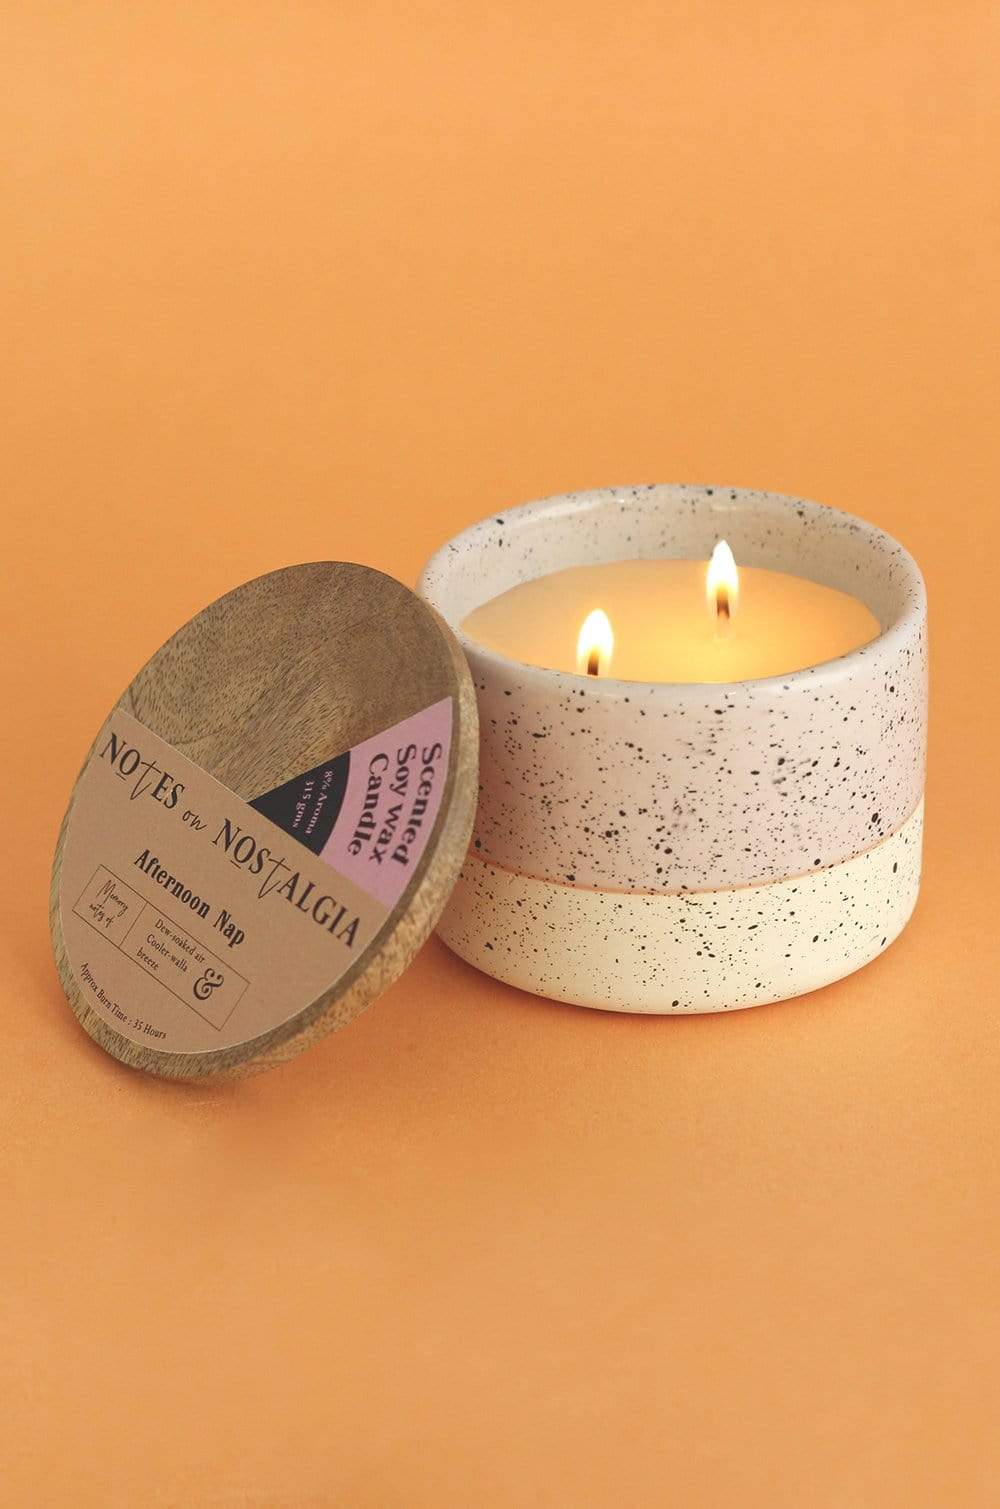 Notes of Nostalgia Scented Soy Wax Candle - Afternoon Nap